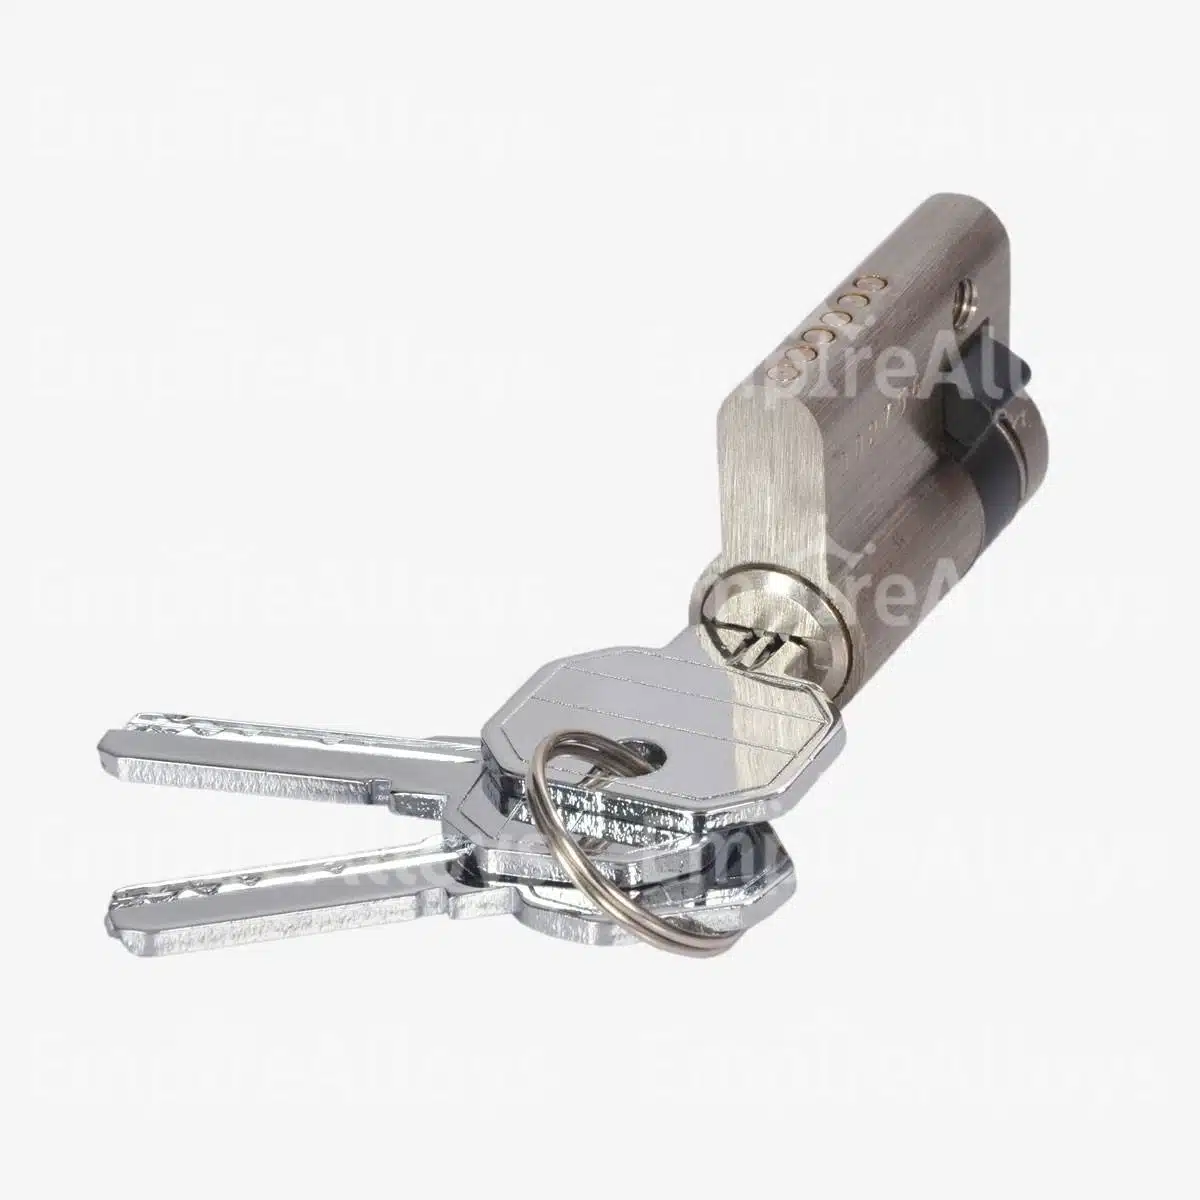 cable clamp connector manufacturer